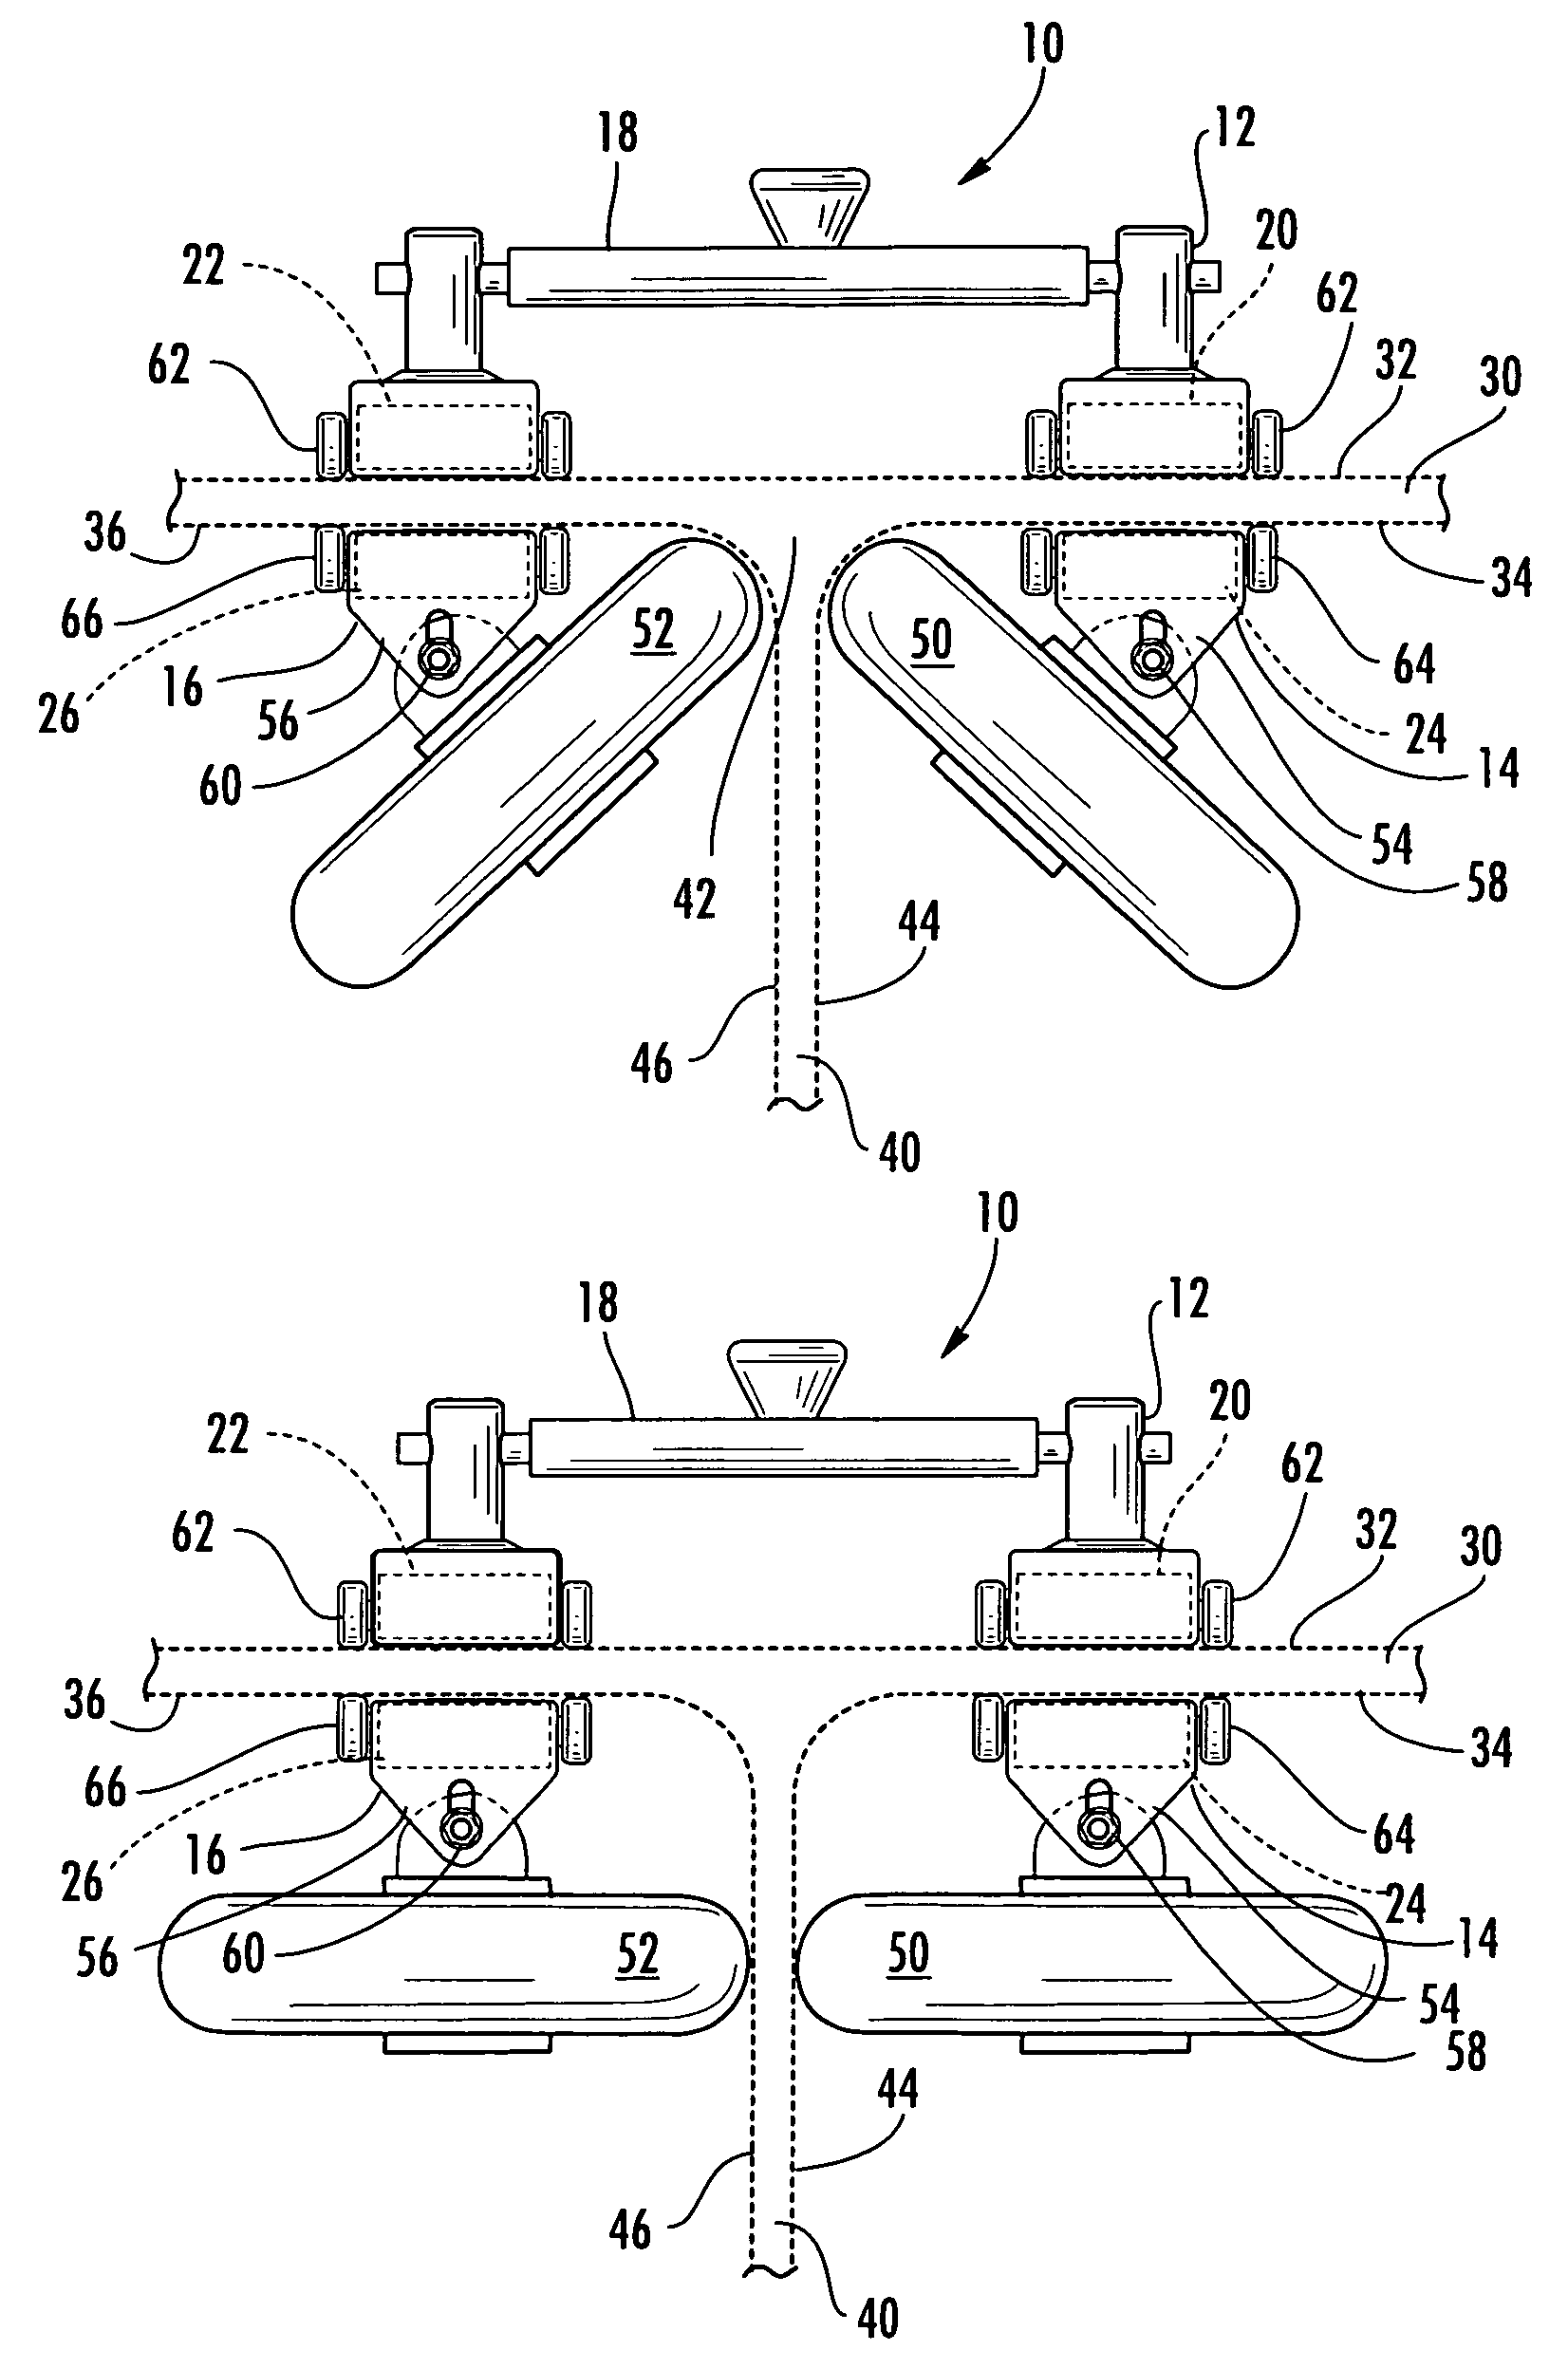 Remote radius inspection tool for composite joints